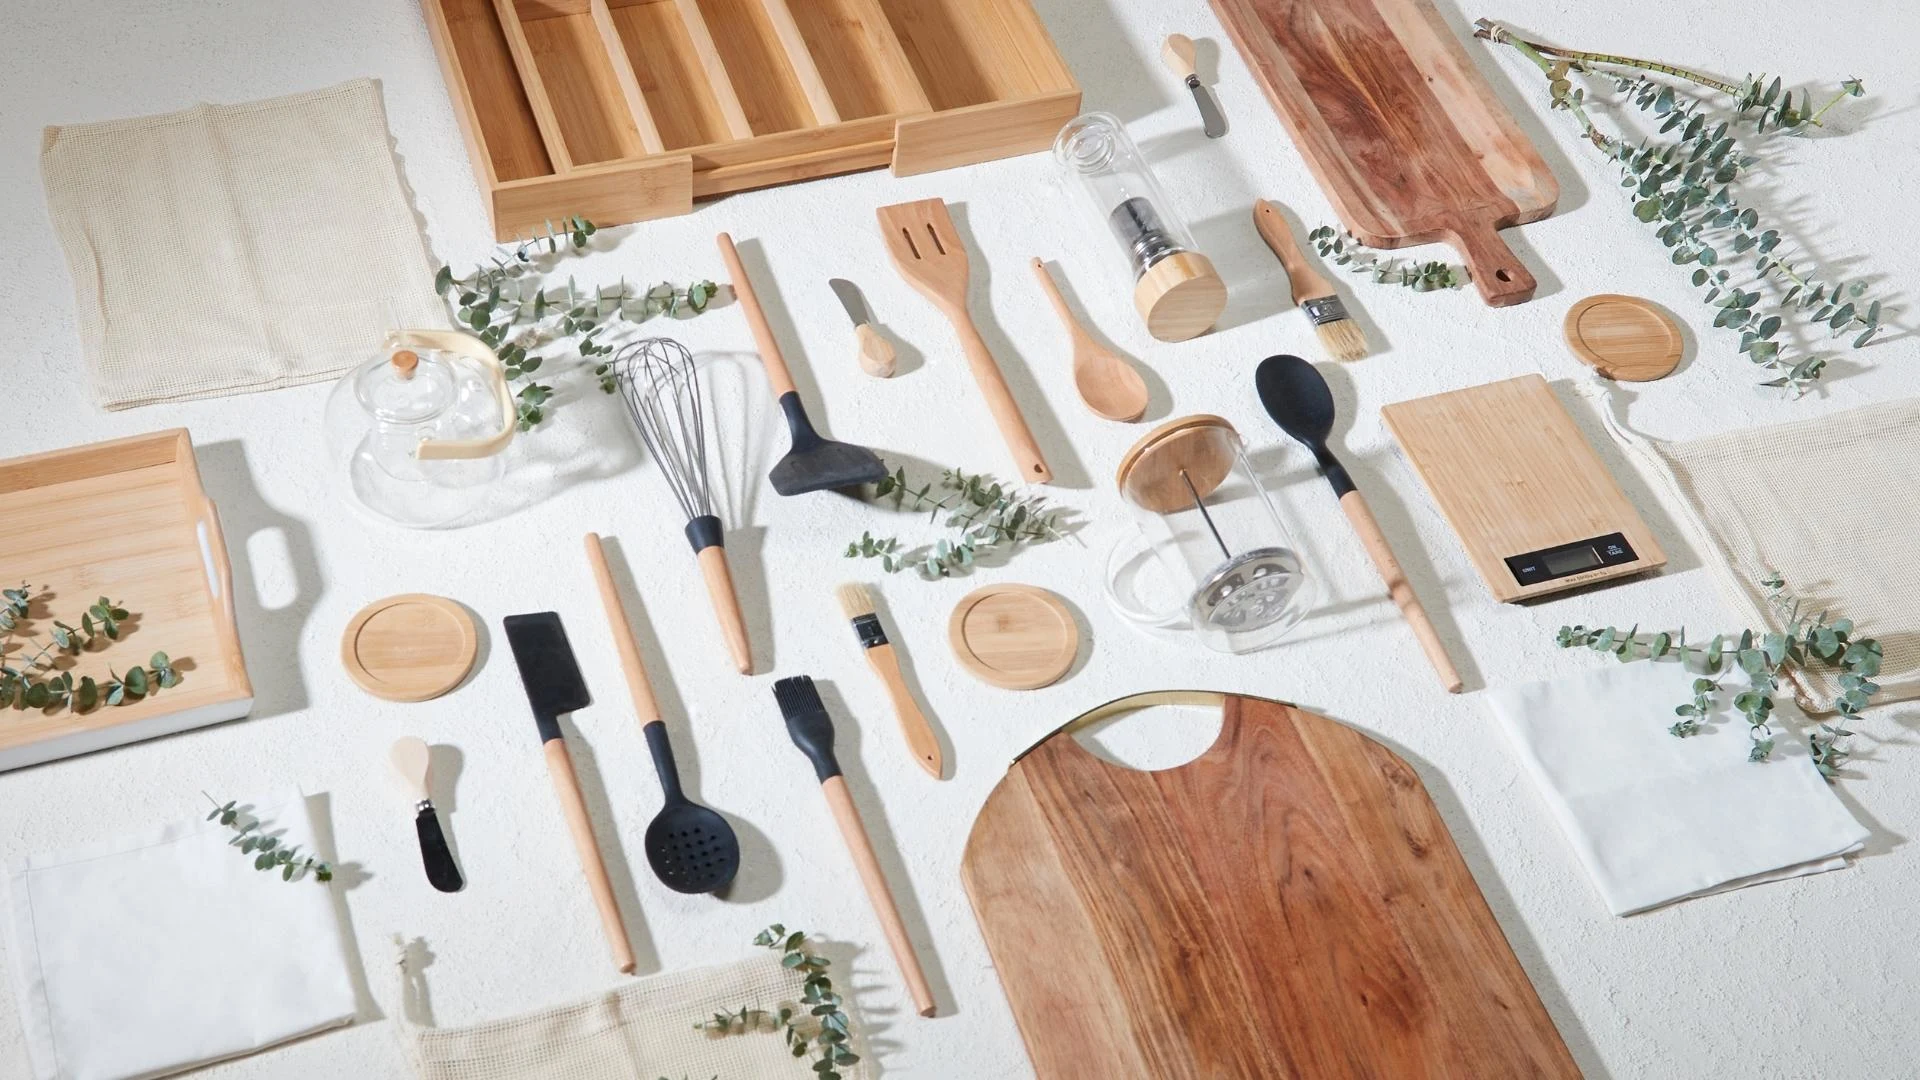 Kitchen cutlery and wooden accessories displayed on a table covered with a white tablecloth